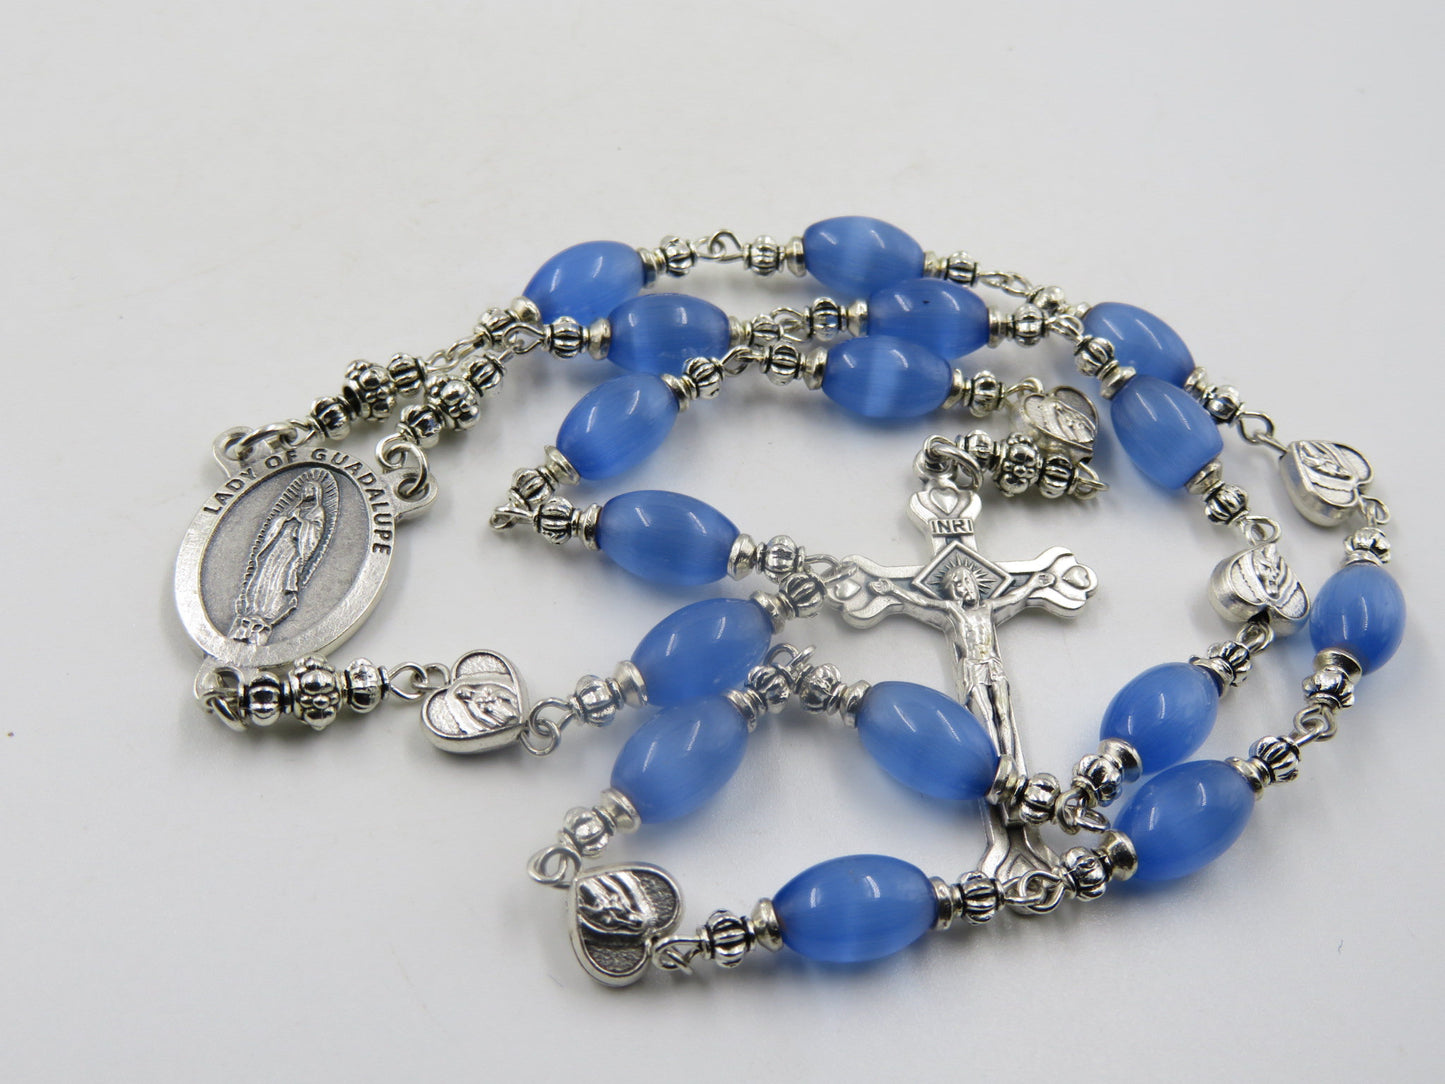 Chaplet to Our Lady of Guadalupe, Glass prayer chaplet, Rosaries, Religious Jewelery, Wedding gift,  Confirmation gift.